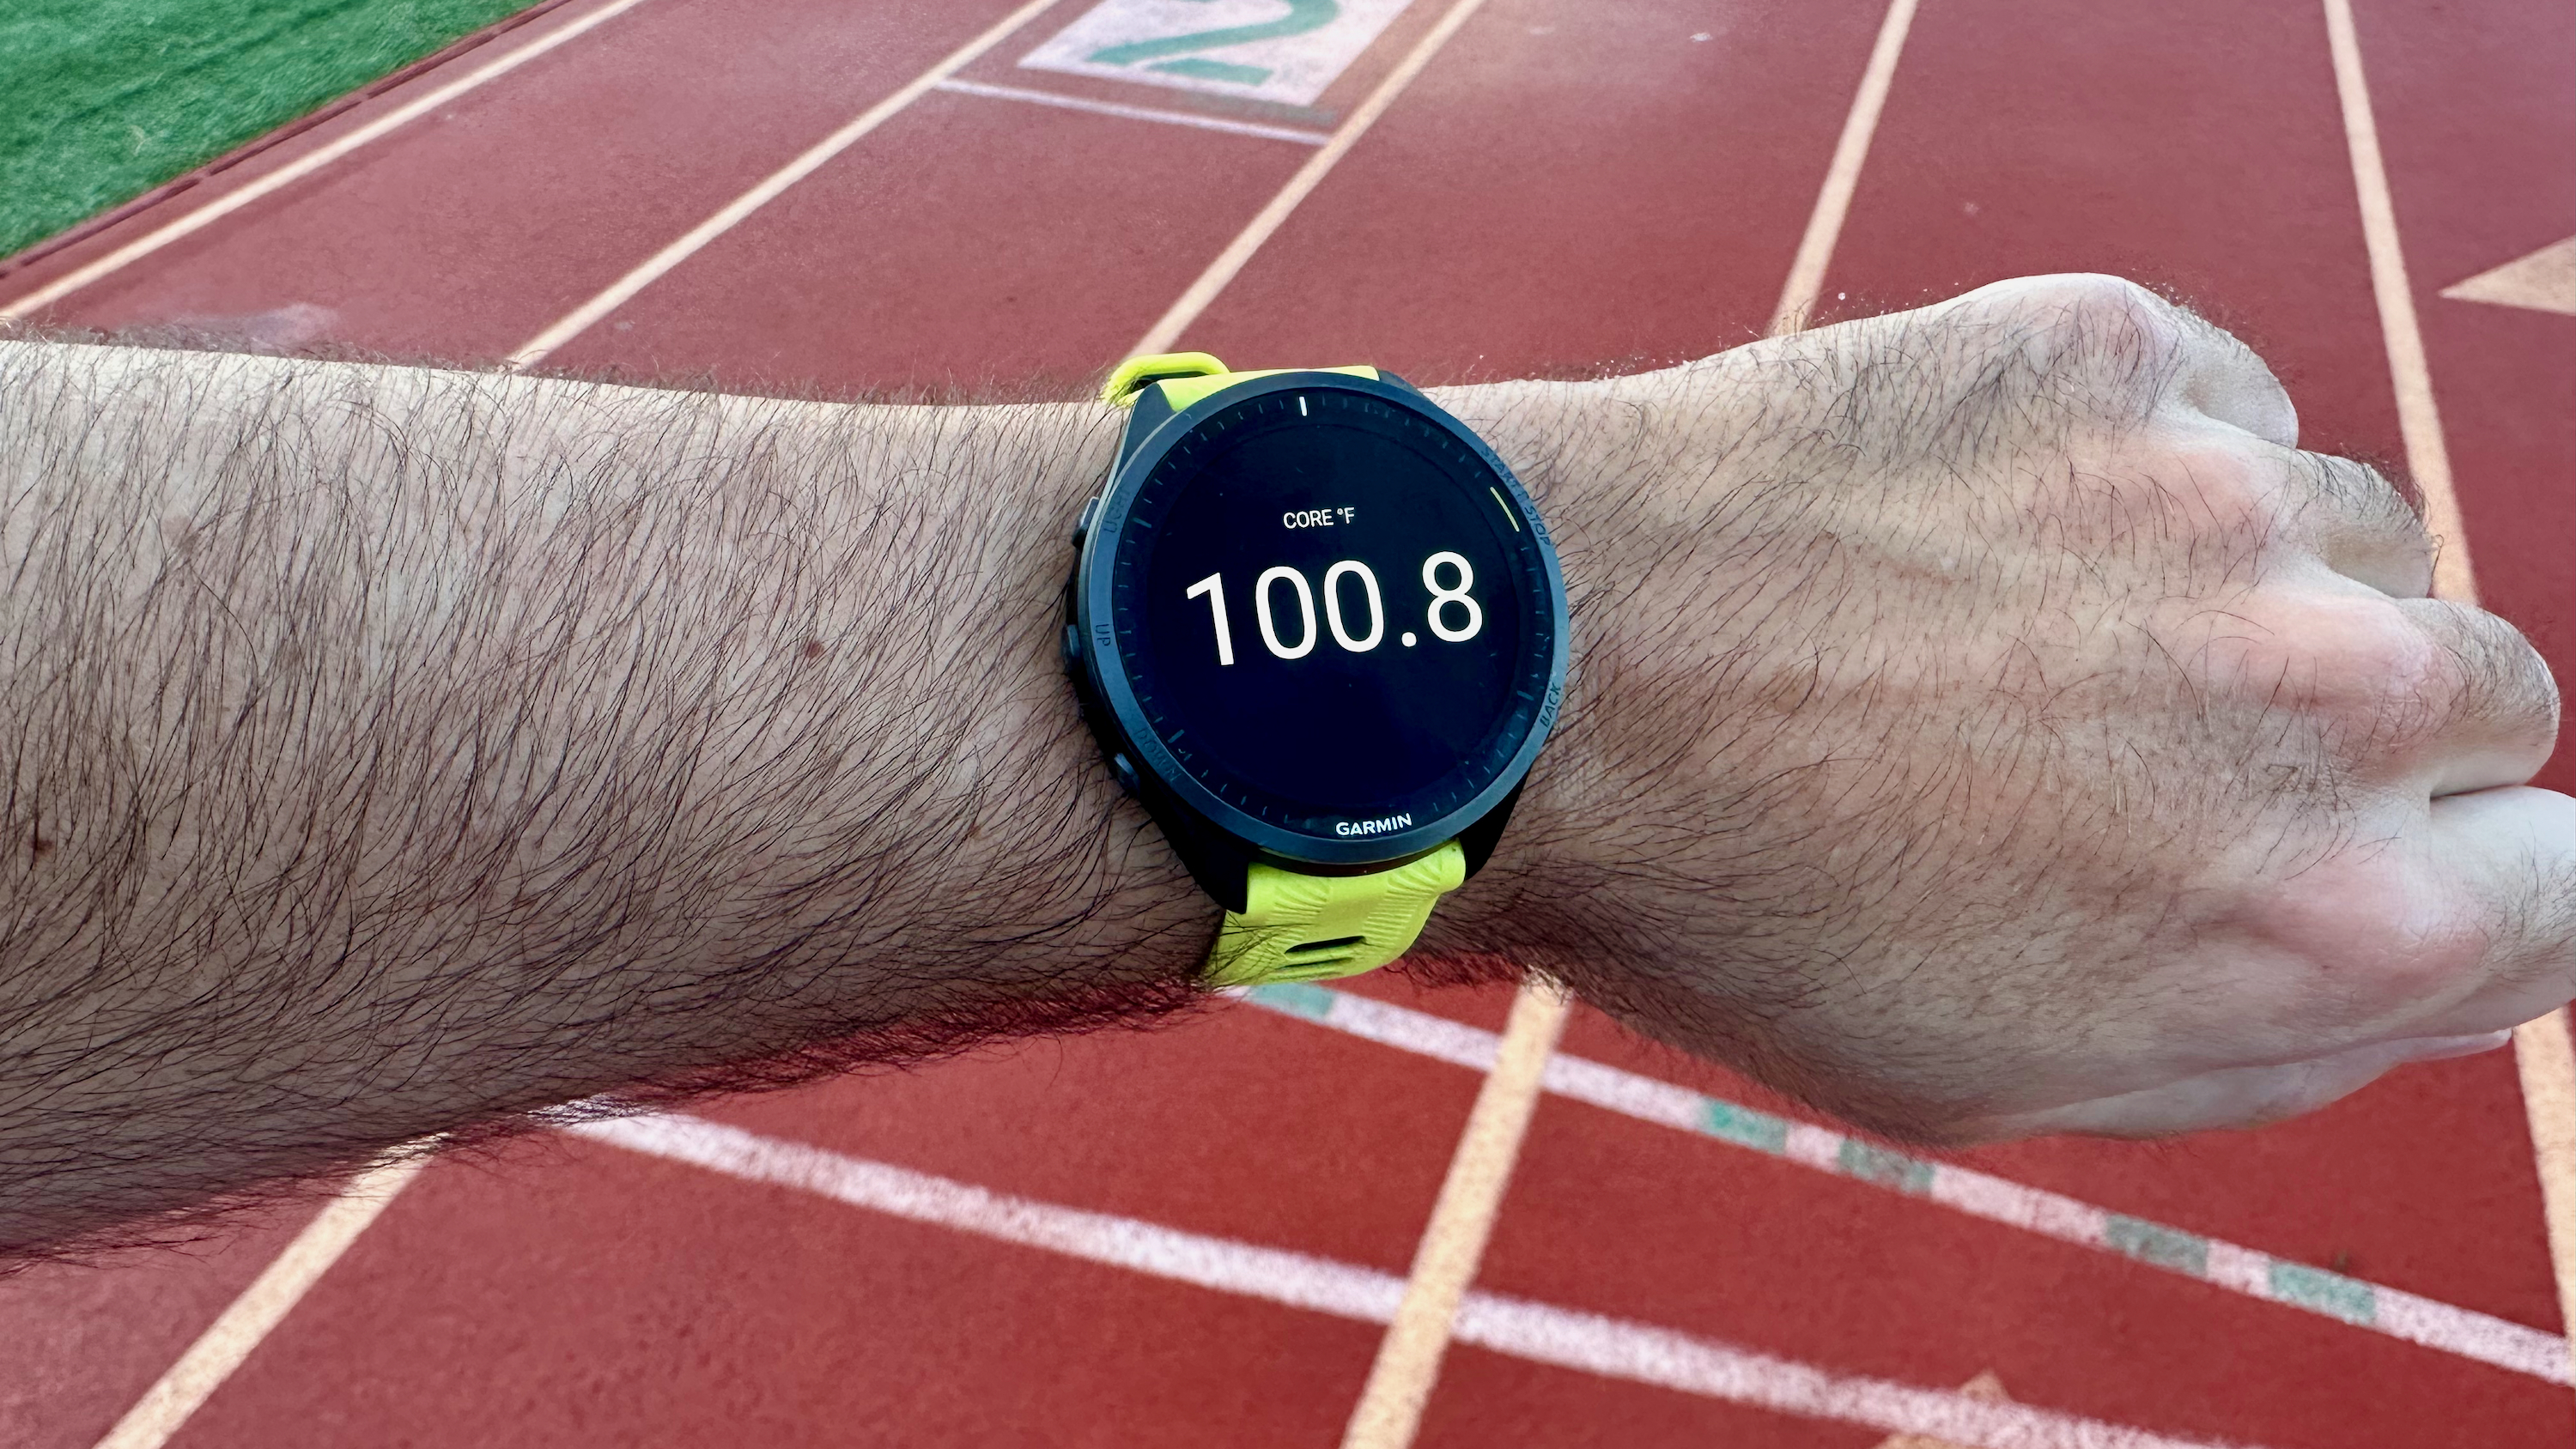 The Garmin Forerunner 965 showing data from the CORE Body Temperature Sensor